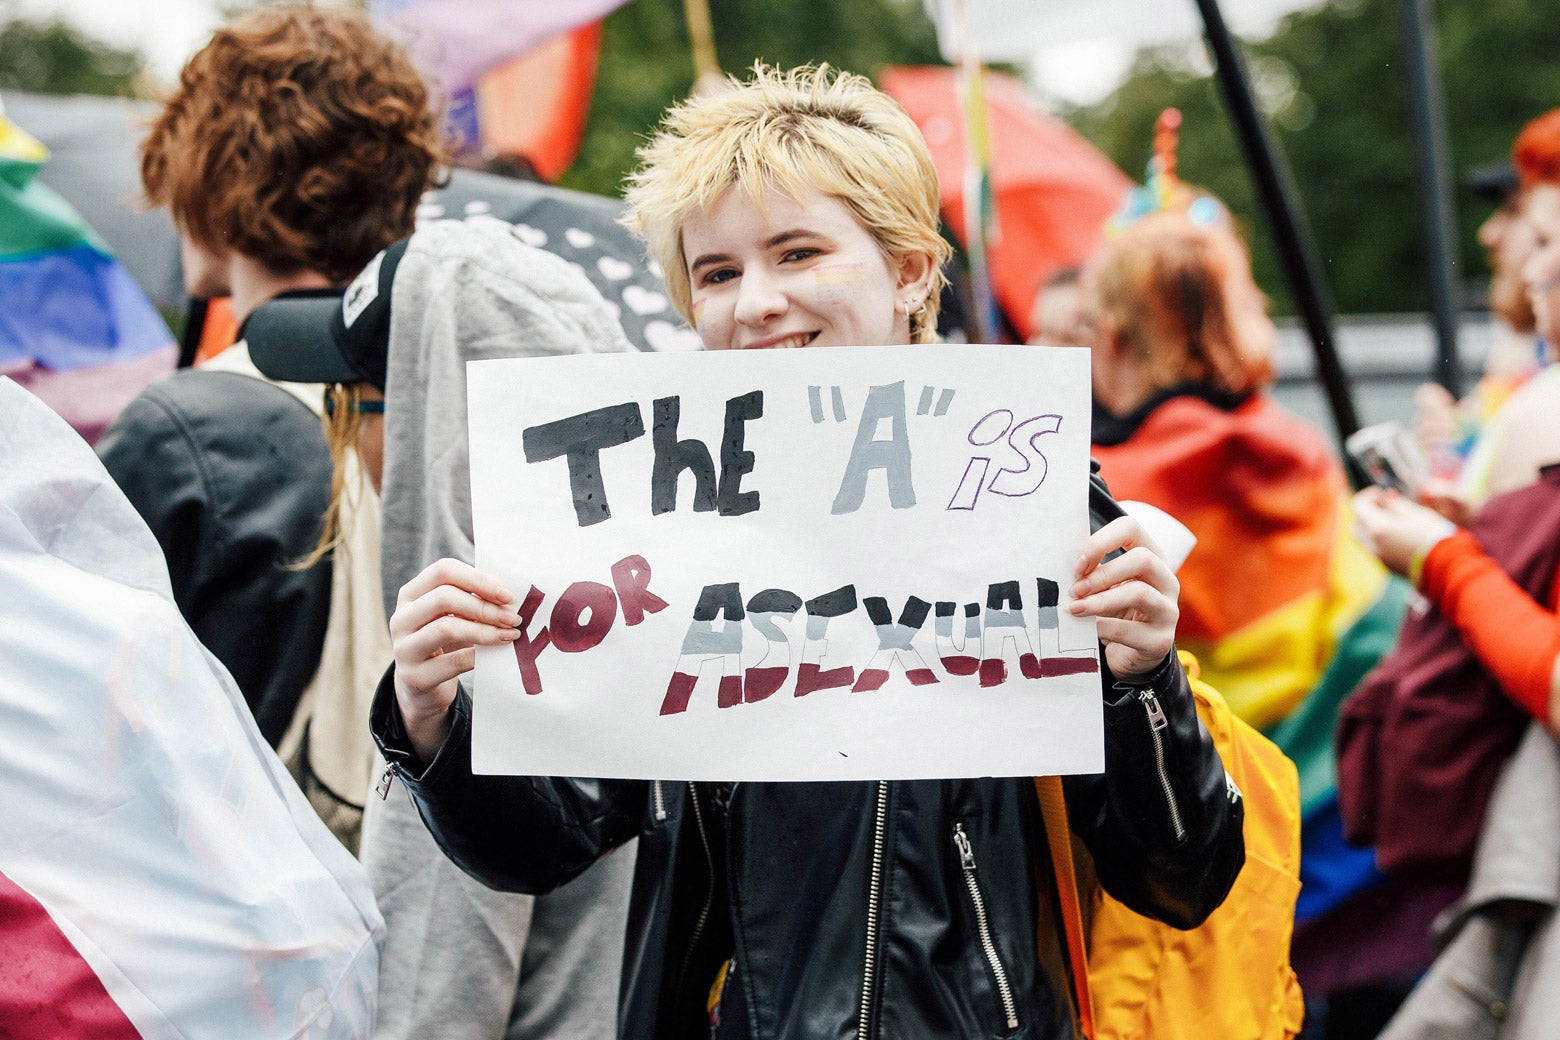 A marcher in a black leather jacket holds a sign that says, “The ‘A’ is for asexual.”